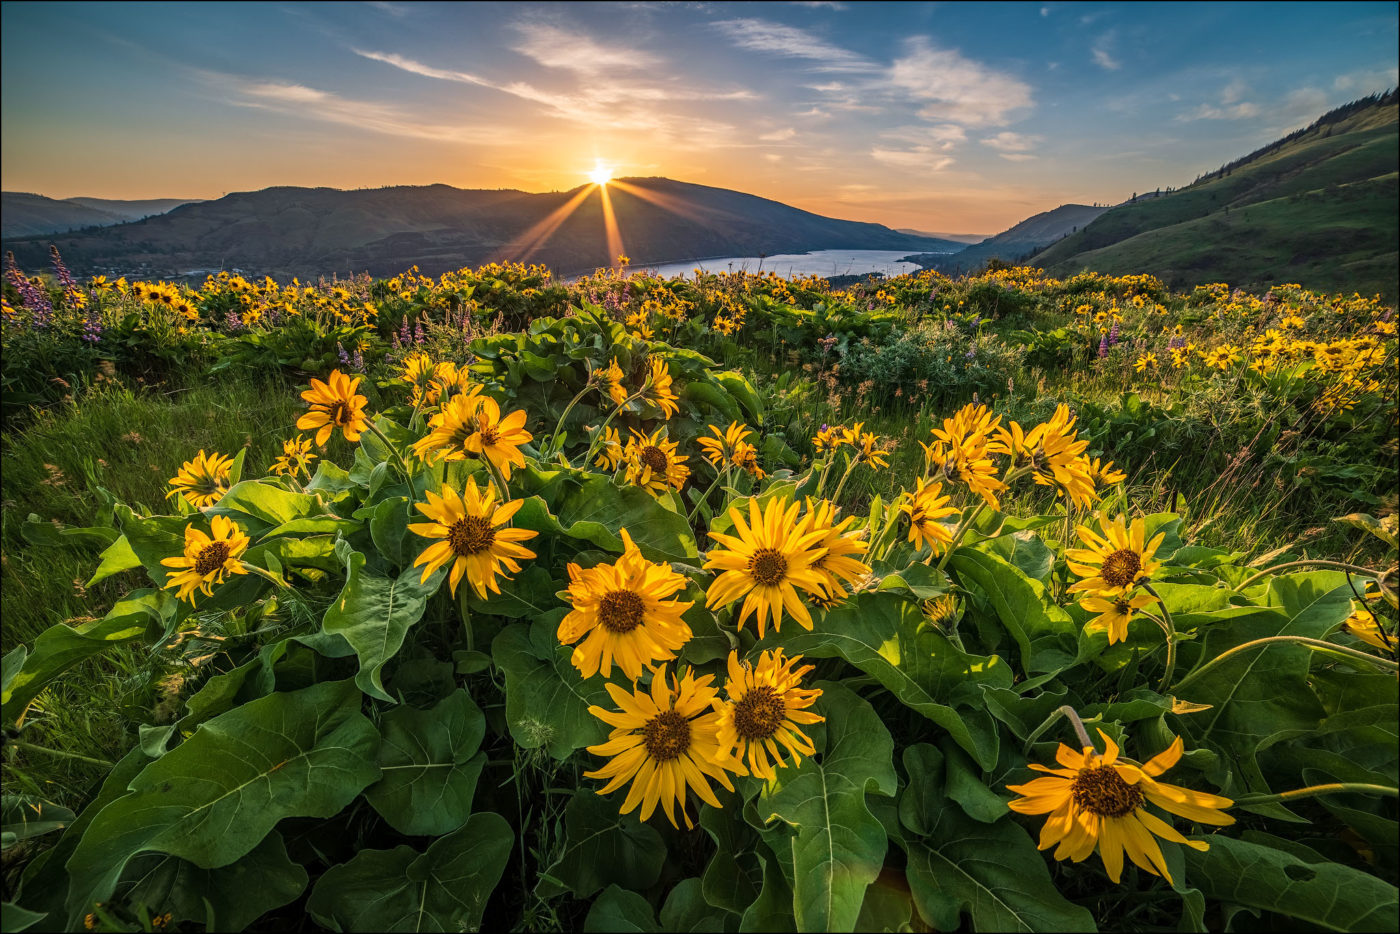 Balsamroot at The Nature Conservancy's Tom McCall Preserve overlooking the Columbia River Gorge in Oregon.